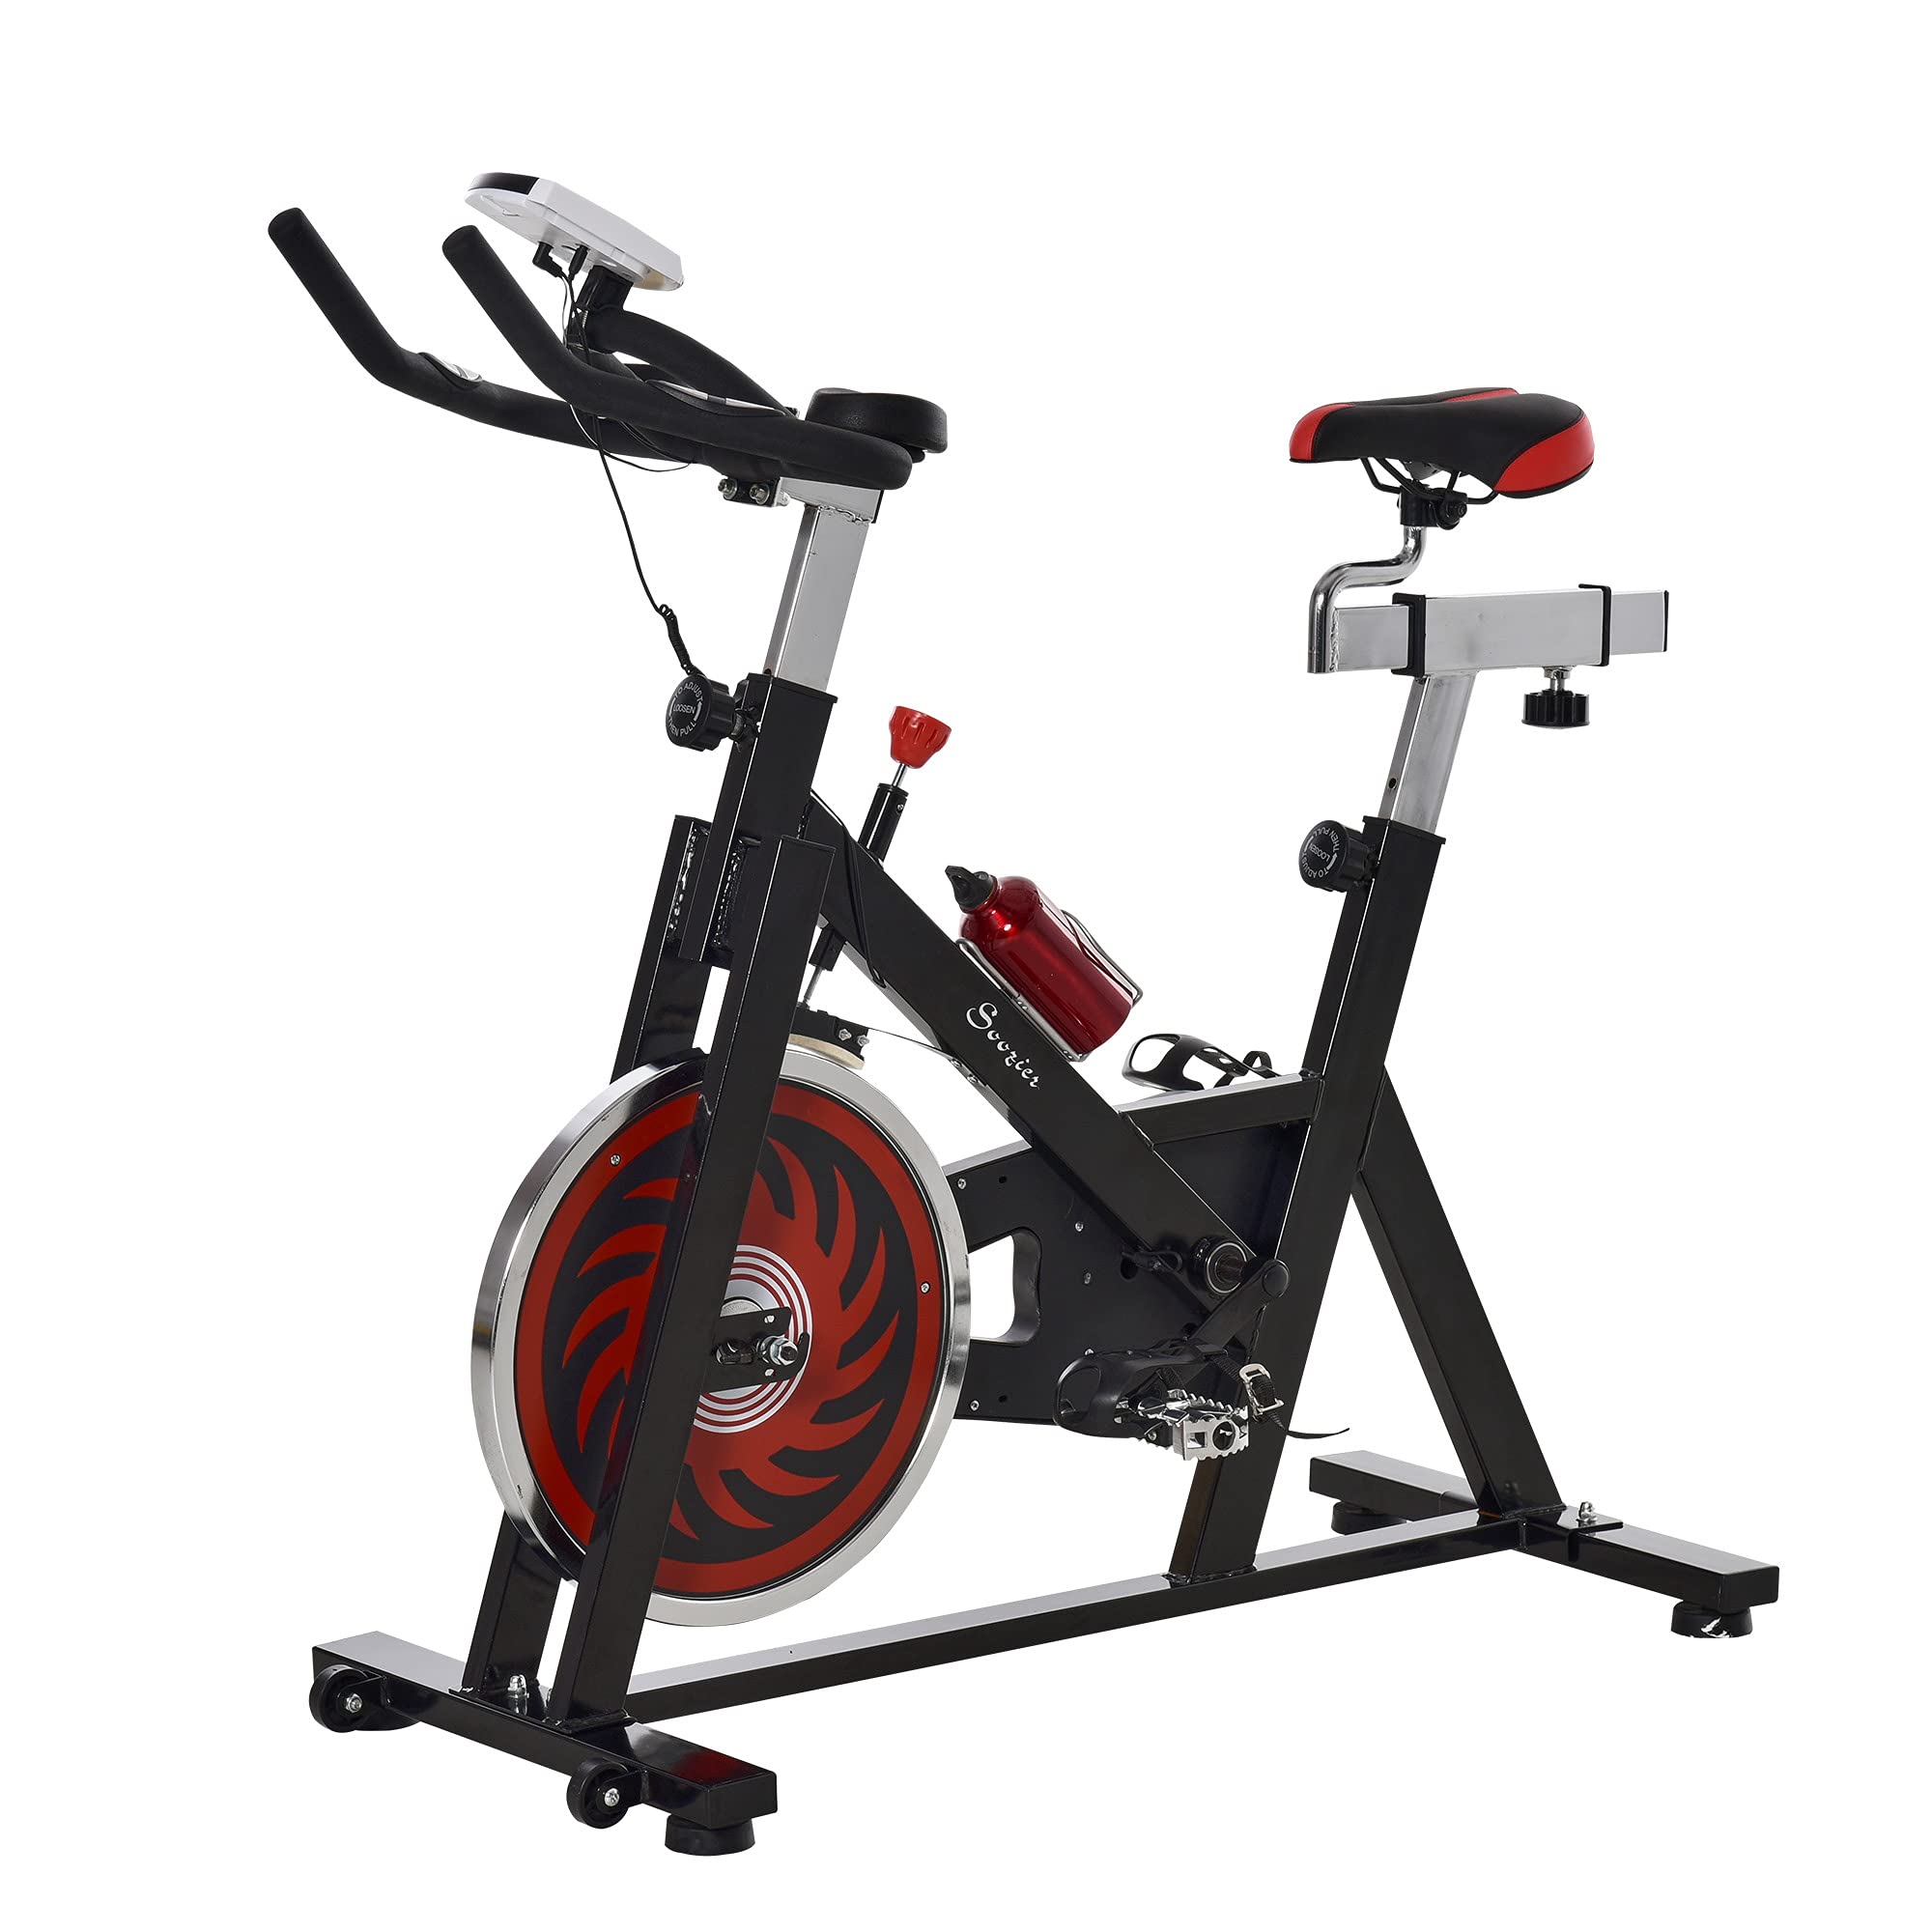 Review of the Soozier Exercise Bike